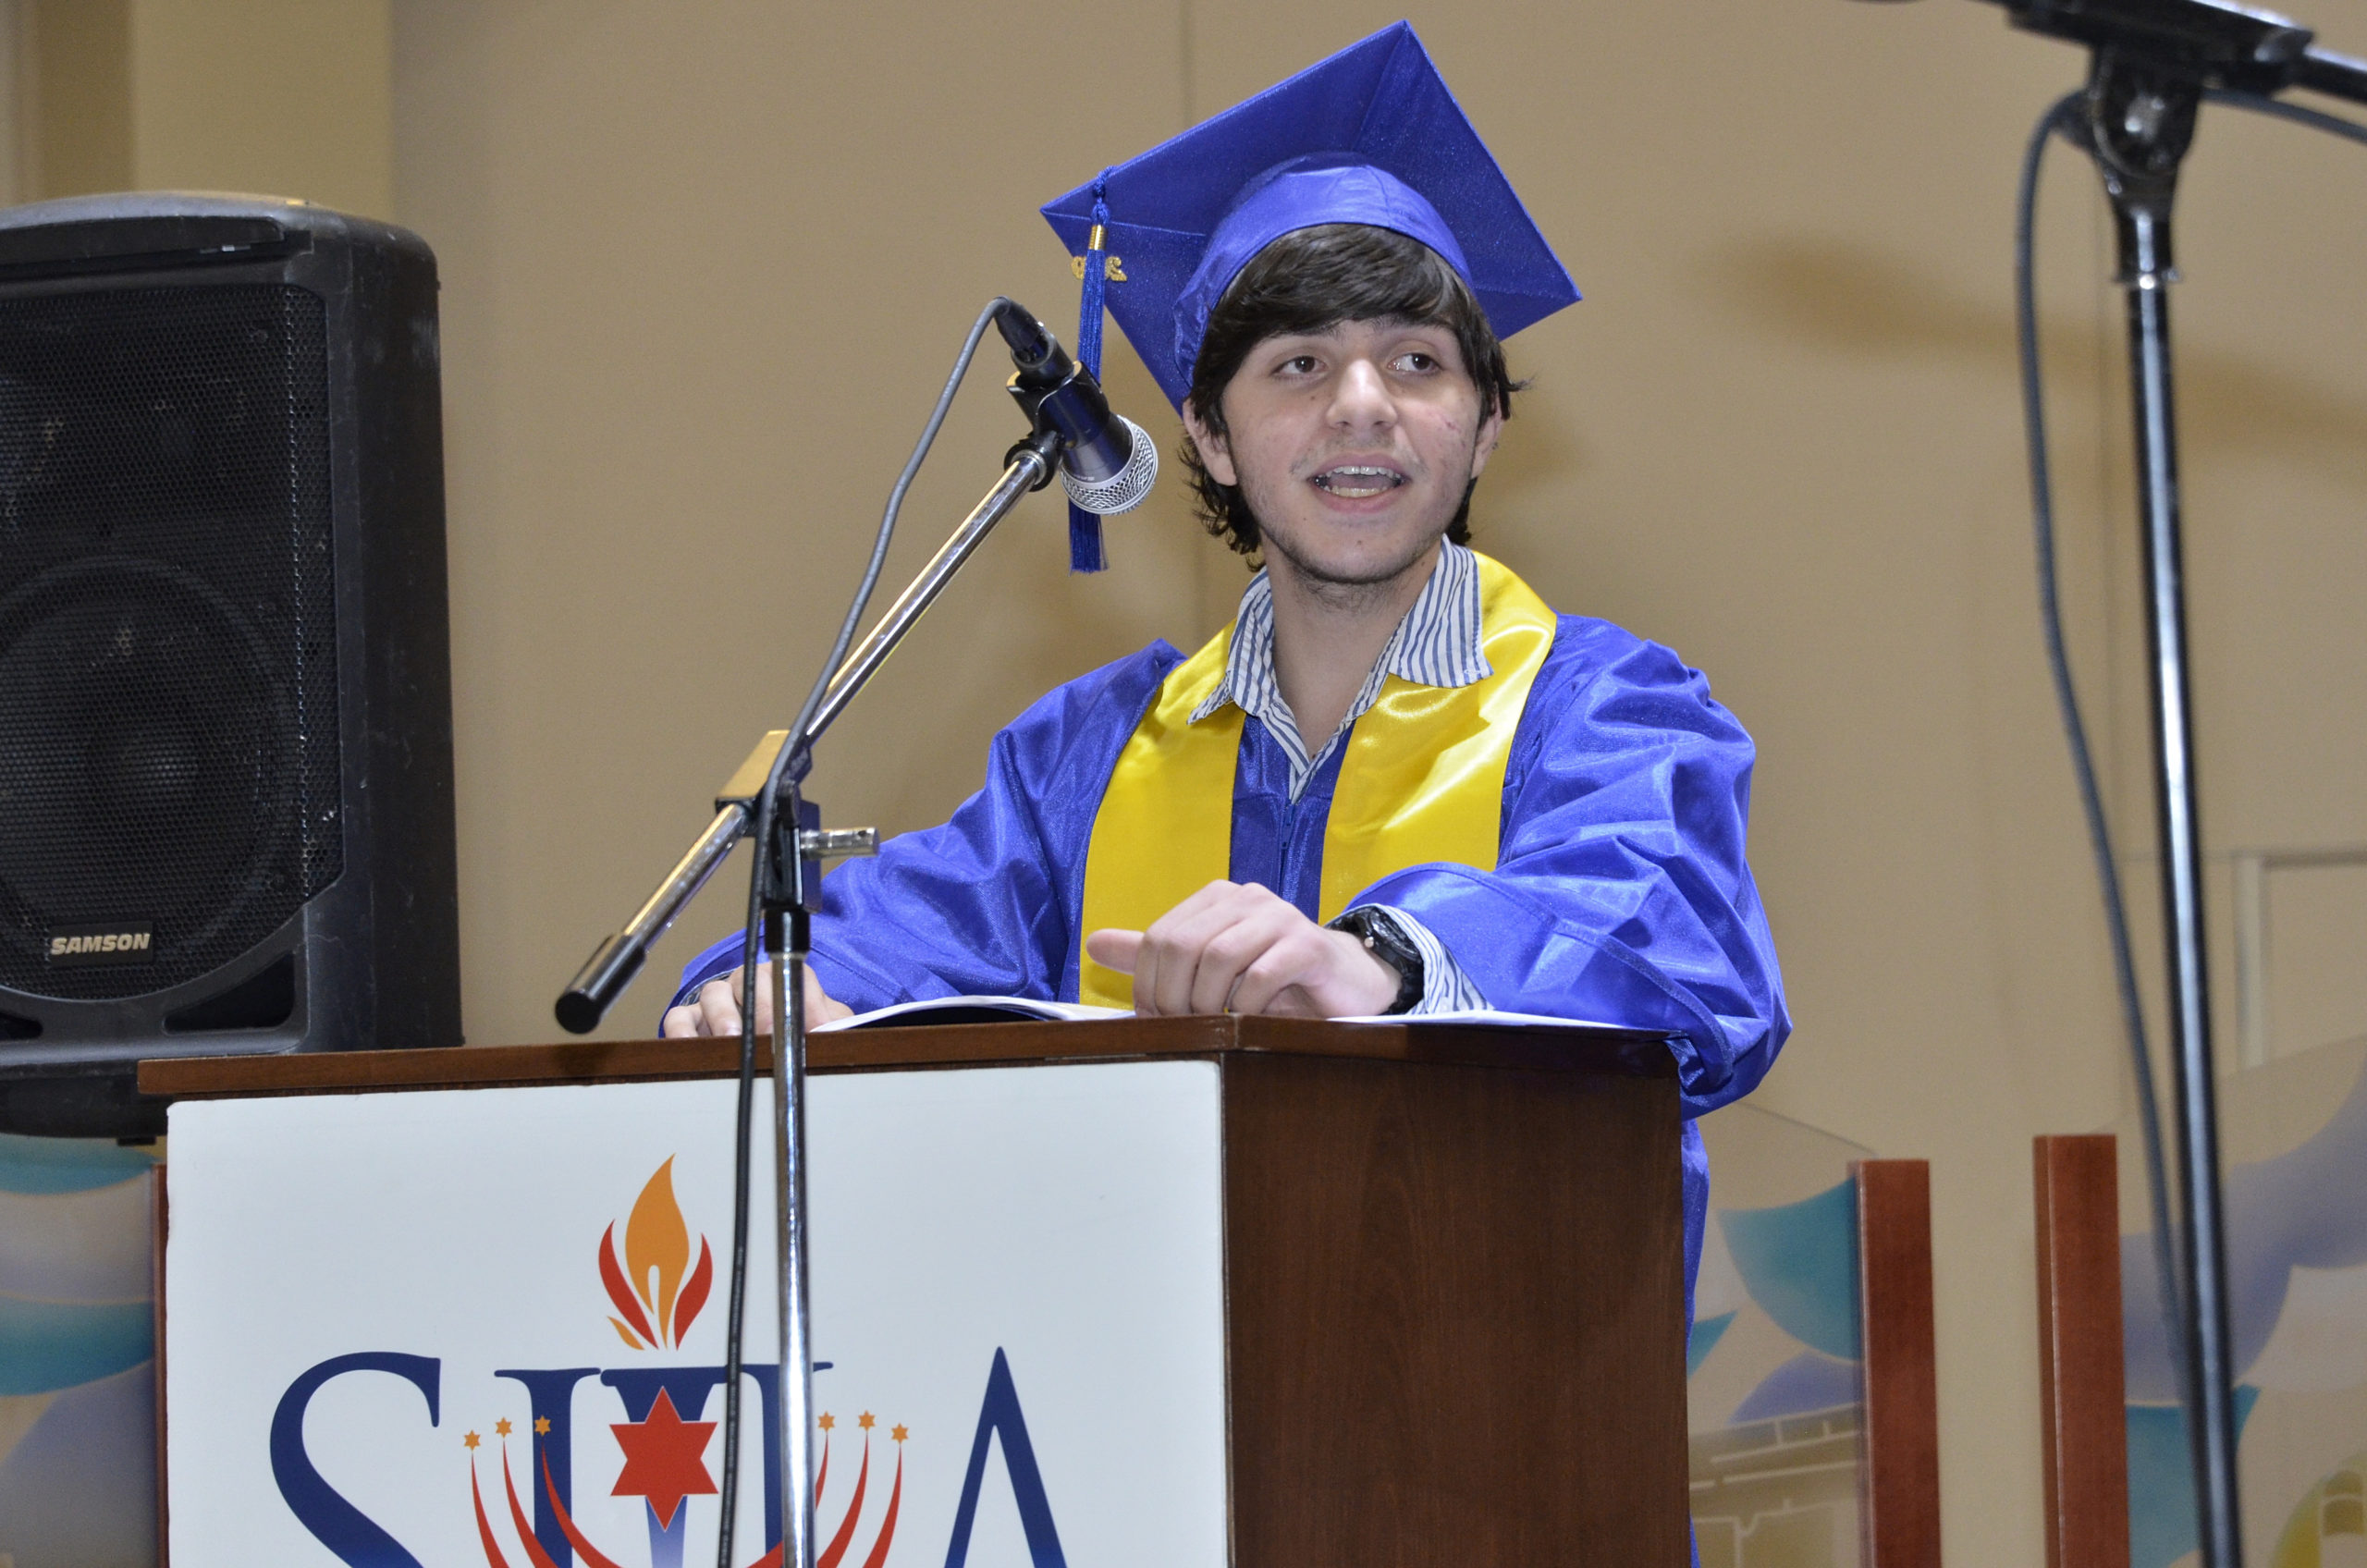 SHA valedictorian, Brayden Kohler, making his speech to friends, family and classmates at the class of 2019 graduation ceremony.